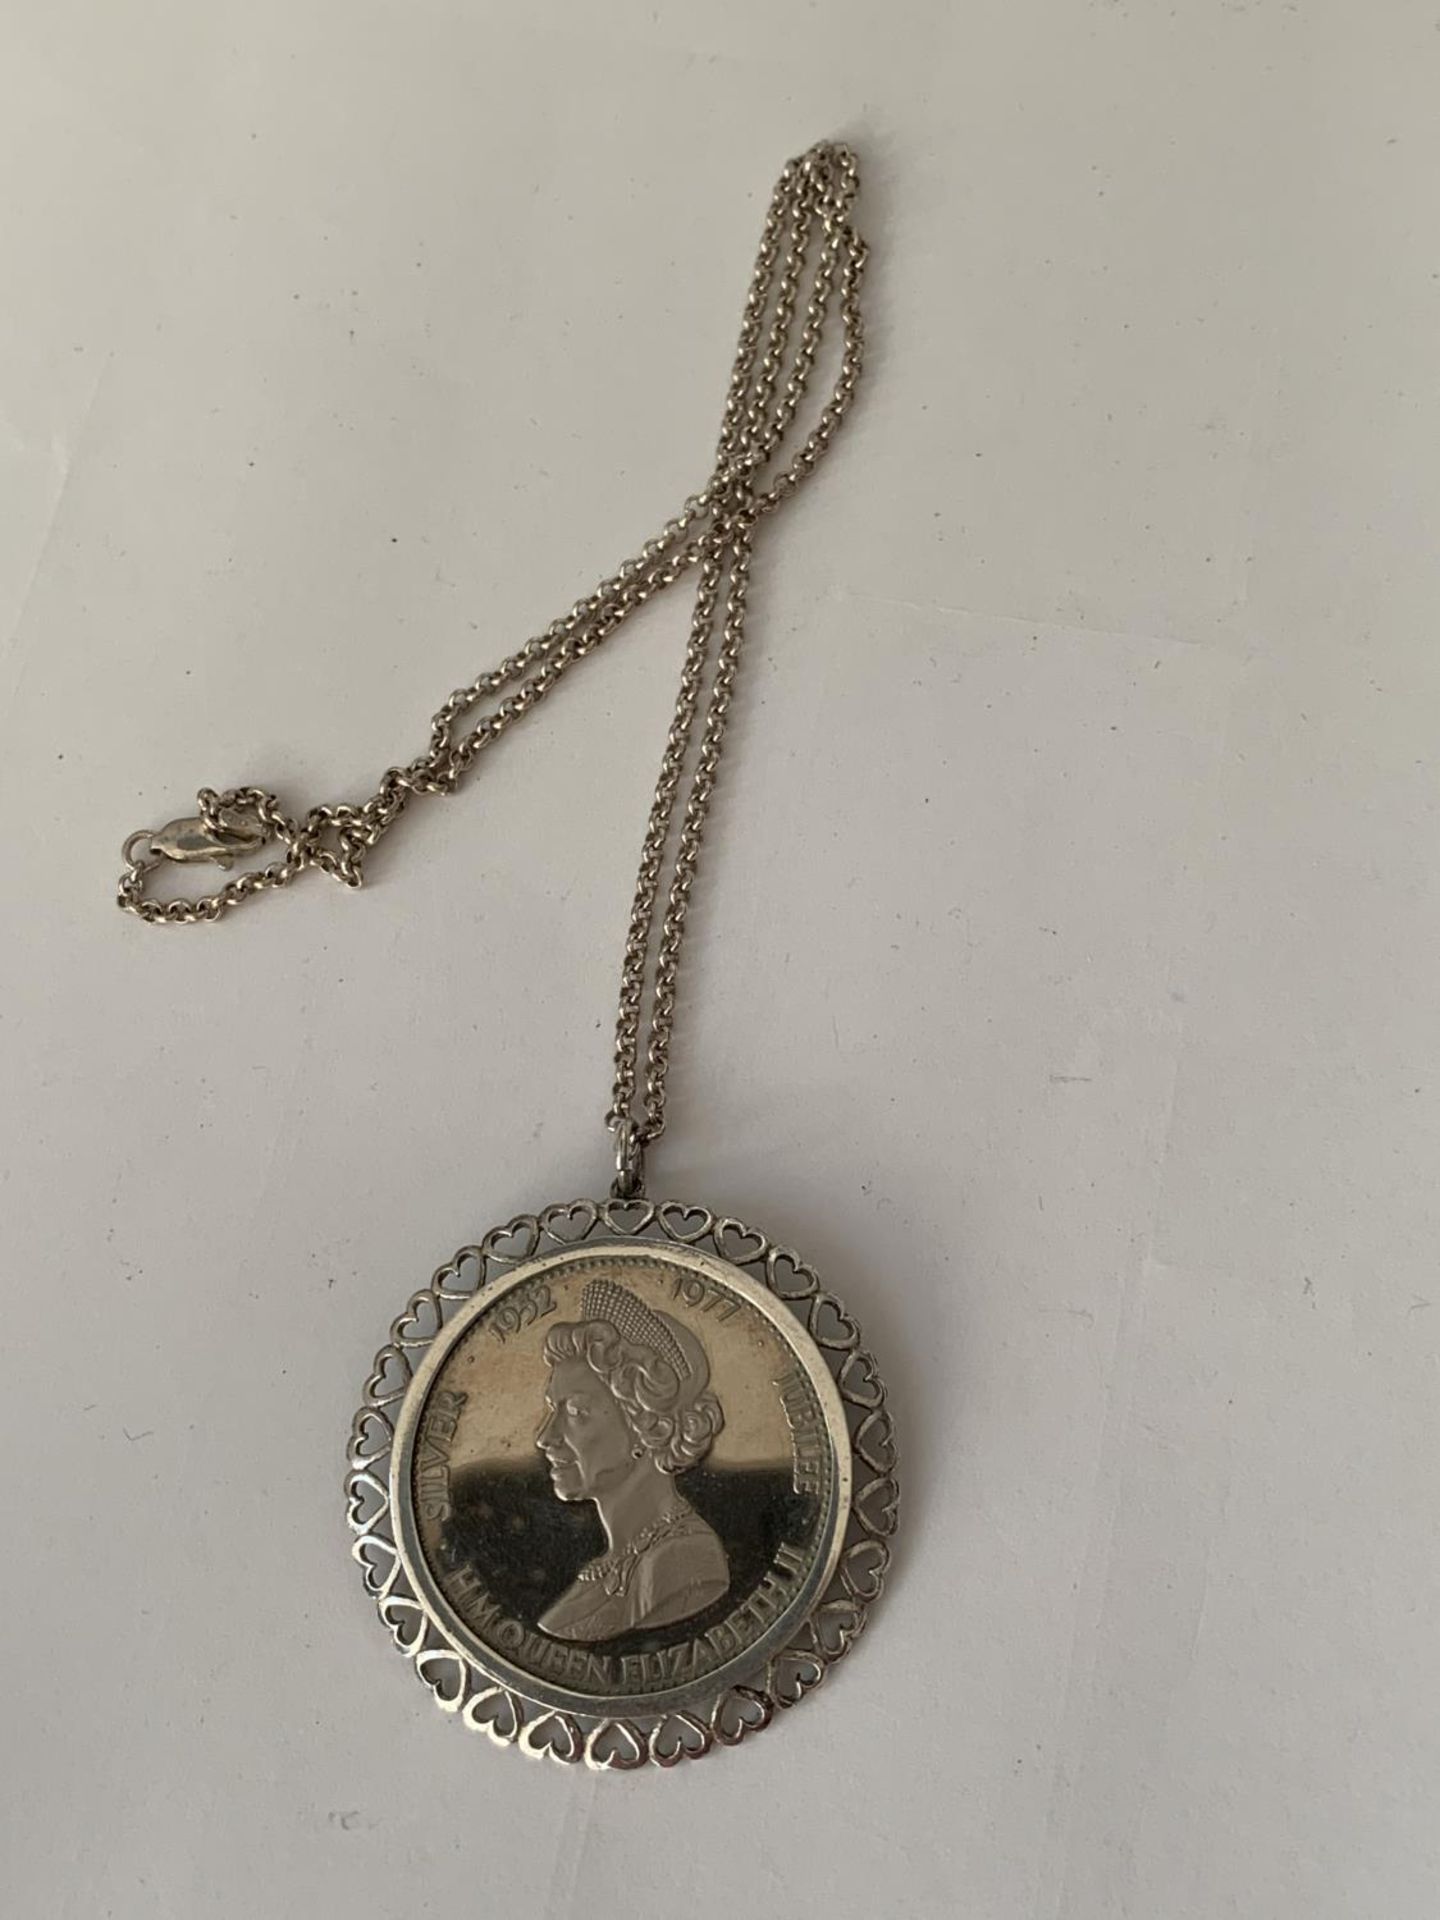 A SILVER JUBILEE COIN NECKLACE